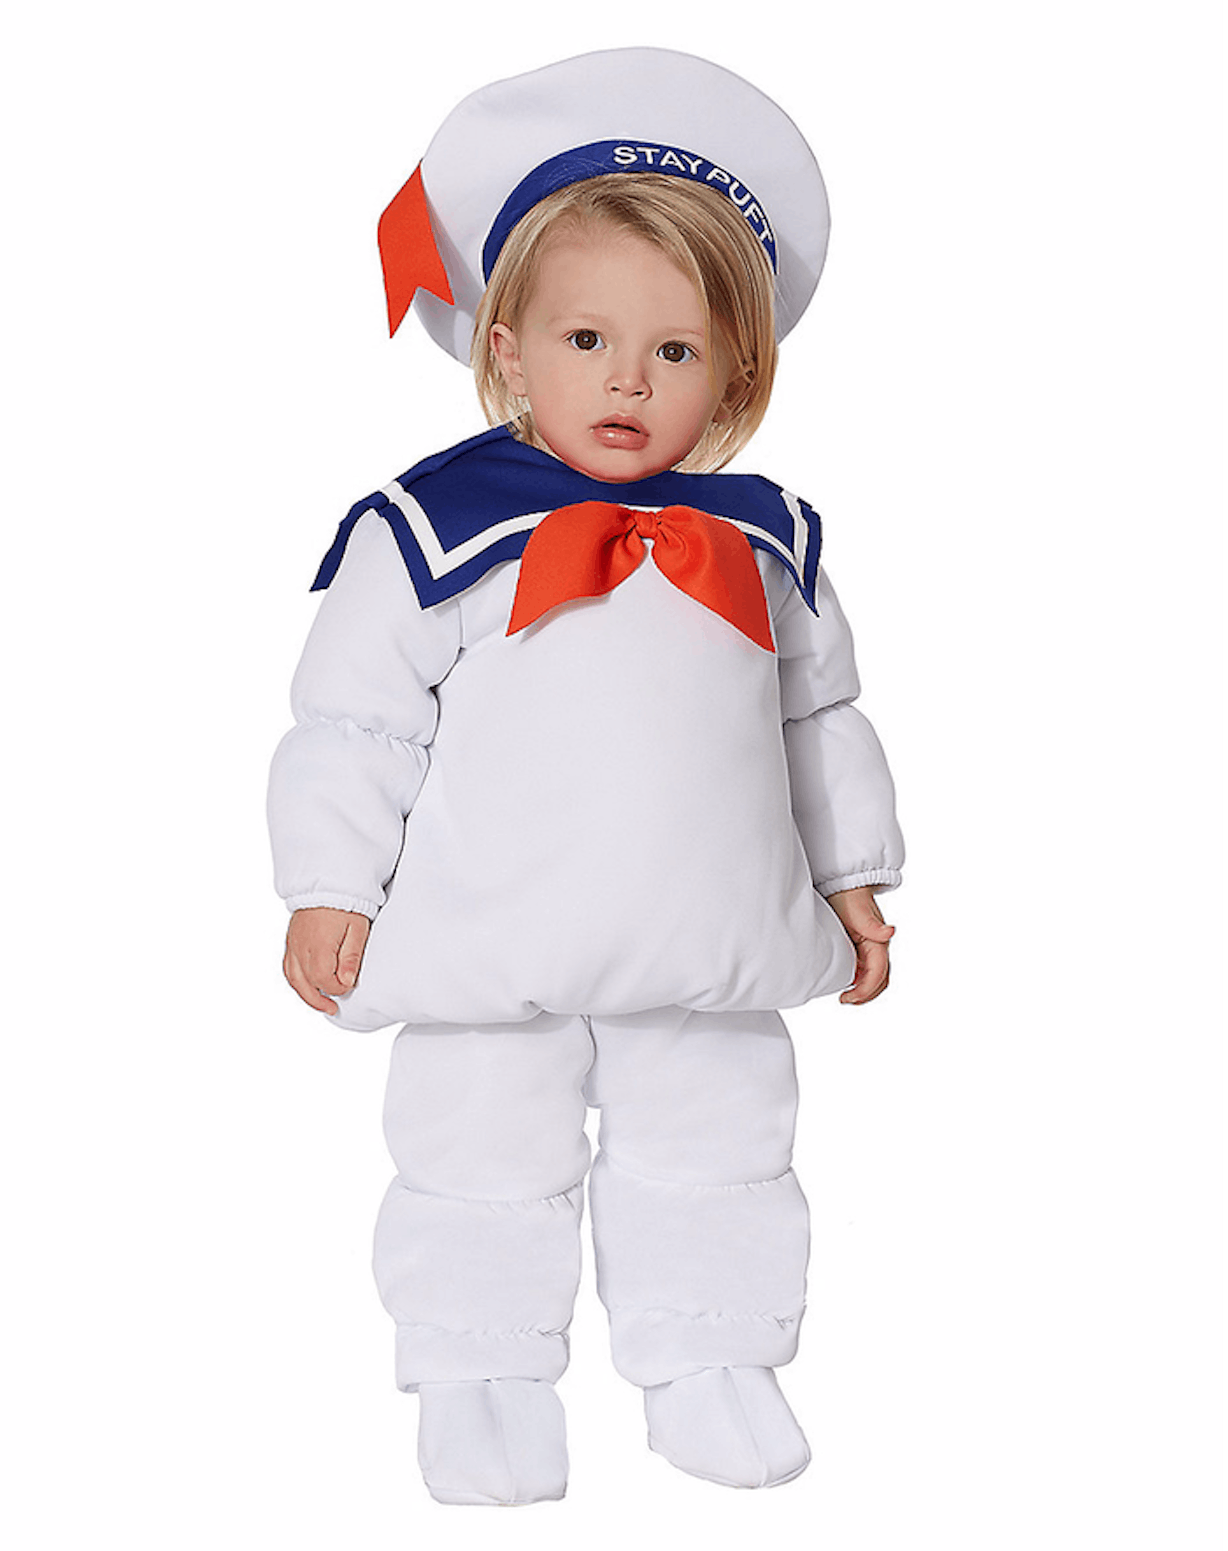 10 Cold Weather Halloween Costume Ideas That Will Keep Your Kids Warm